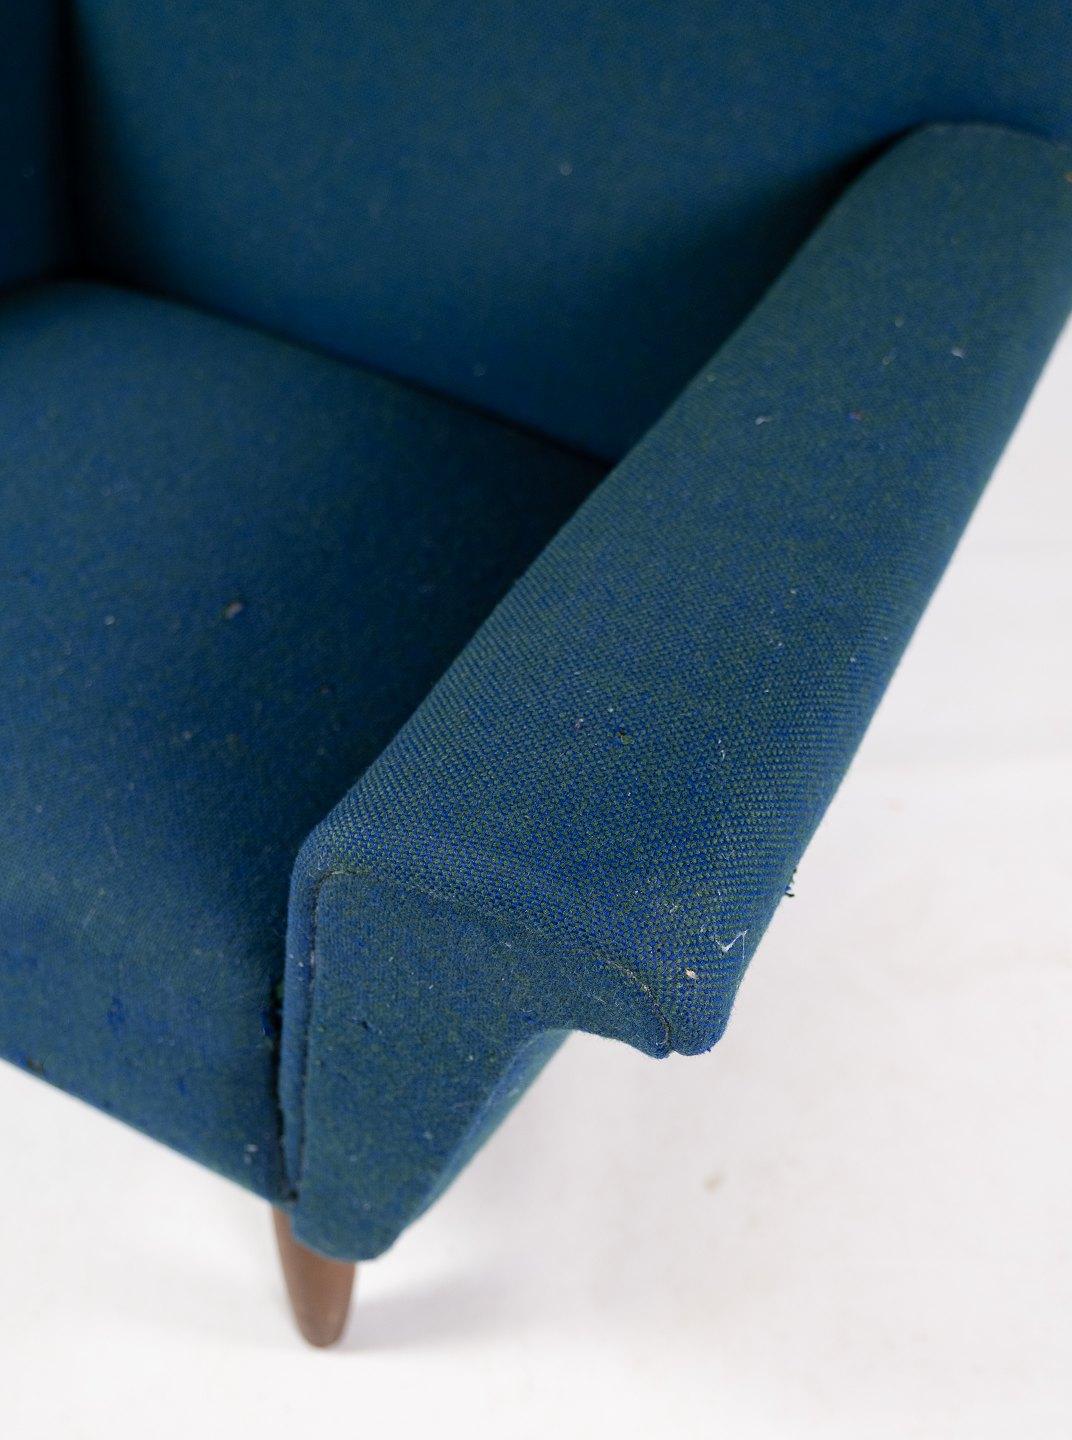 Scandinavian Modern Armchair Upholstered with Dark Blue Wool Fabric and Legs in Dark Wood, 1960s For Sale